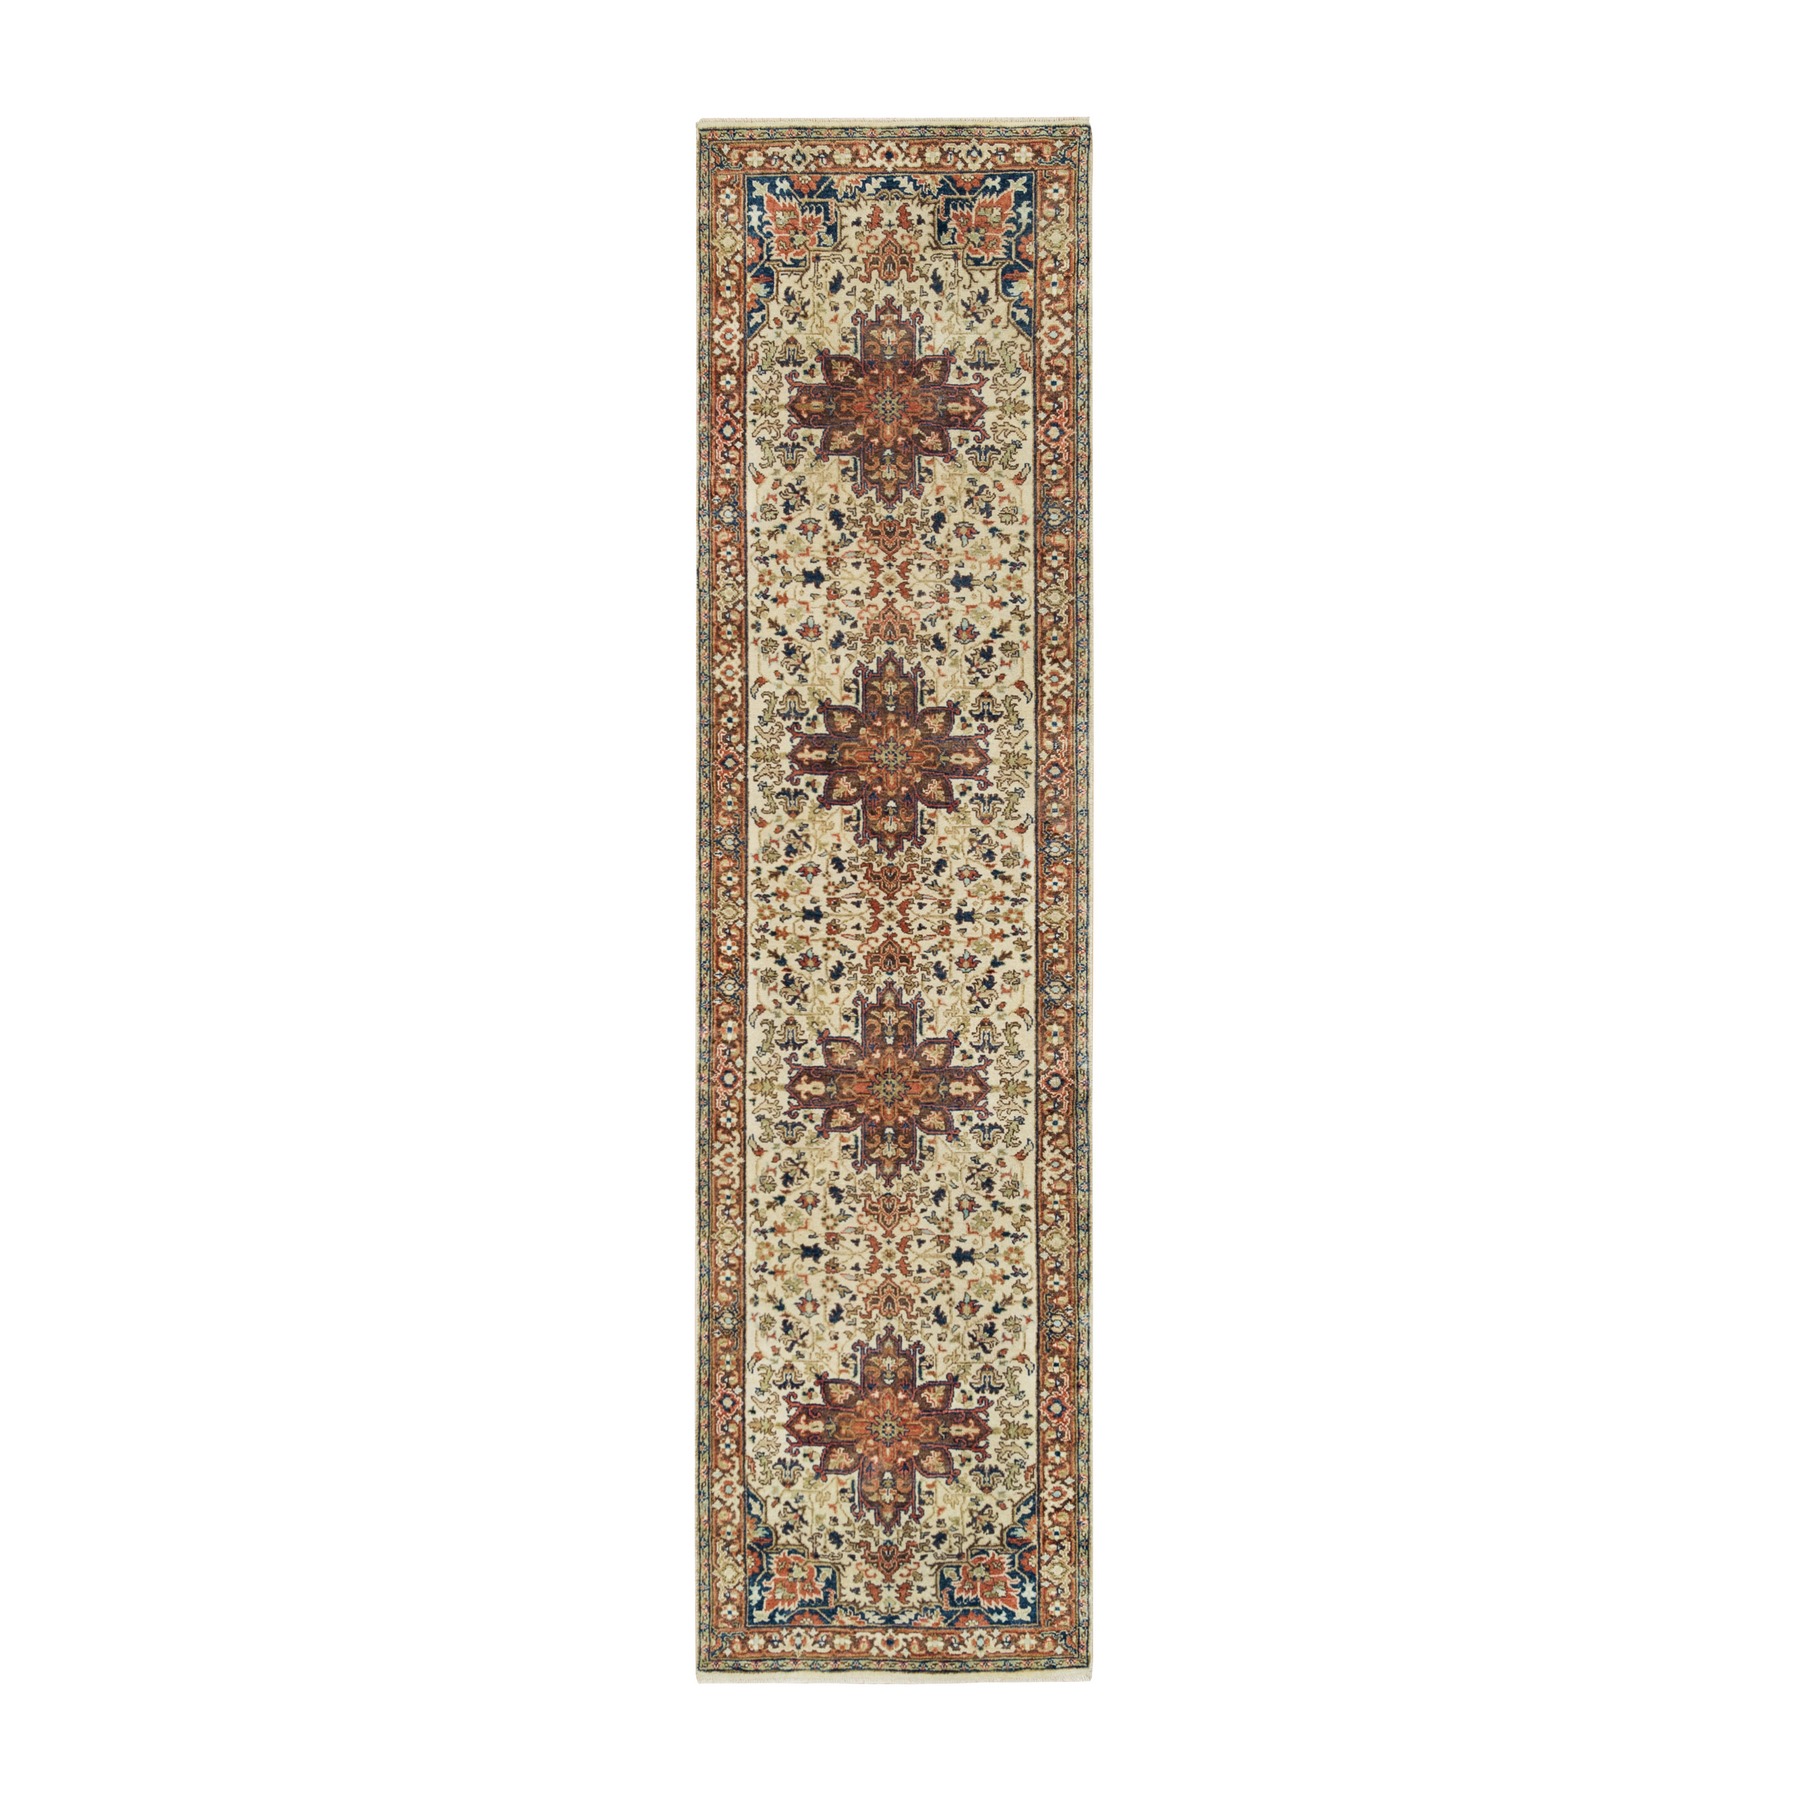 2'7"x10'3" Beige, Antiqued Heriz Re-Creation with Geometric Medallions, Extra Soft Wool, Hand Woven, Runner Oriental Rug 